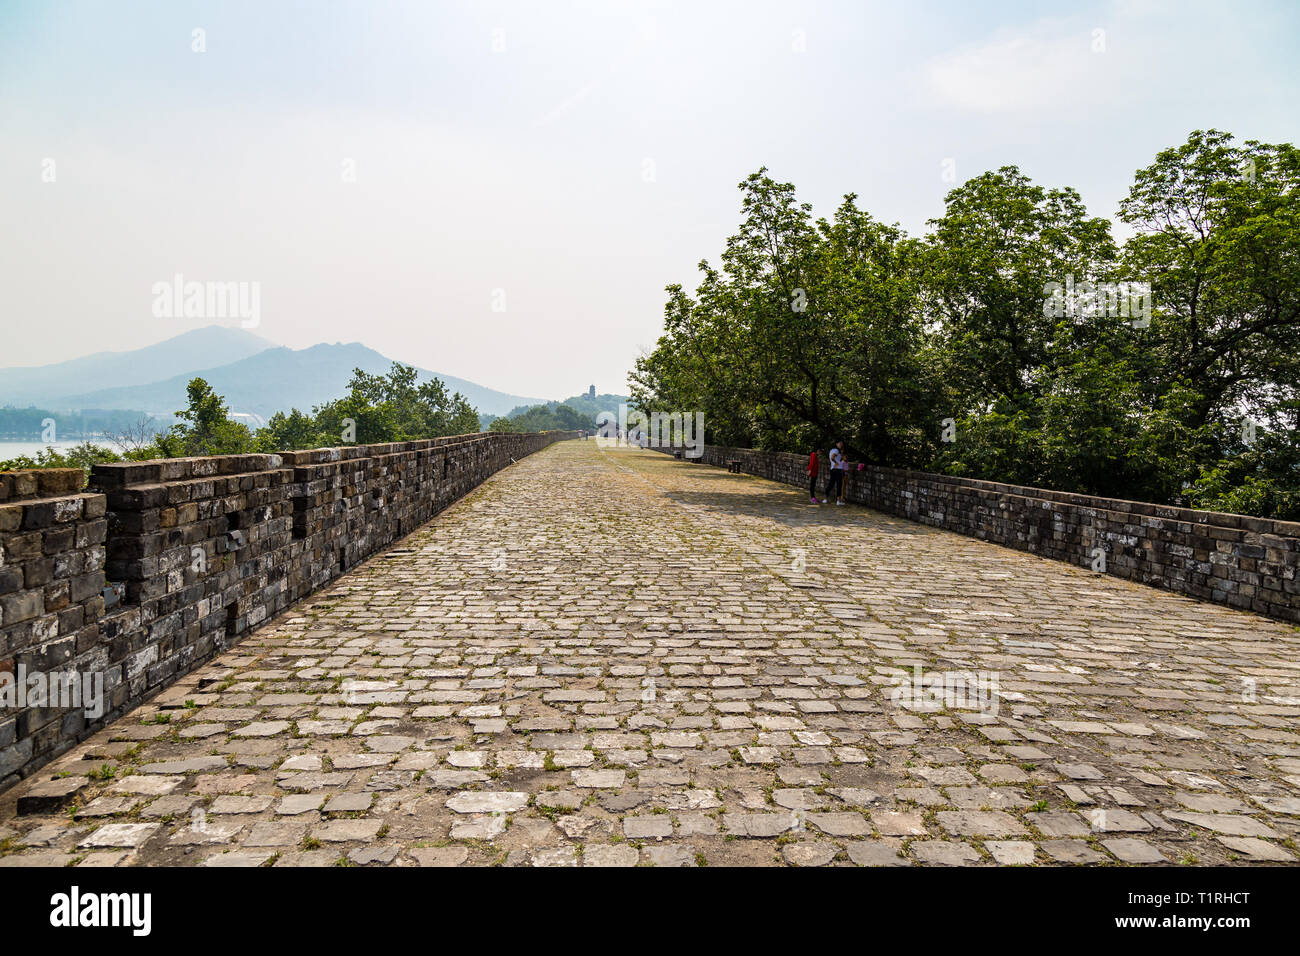 May 2017 - Nanjing, Jiangsu, China - tourists walk on a section of the old Ming Dynasty city walls near Jiming temple. Zijin mountain is visible far a Stock Photo